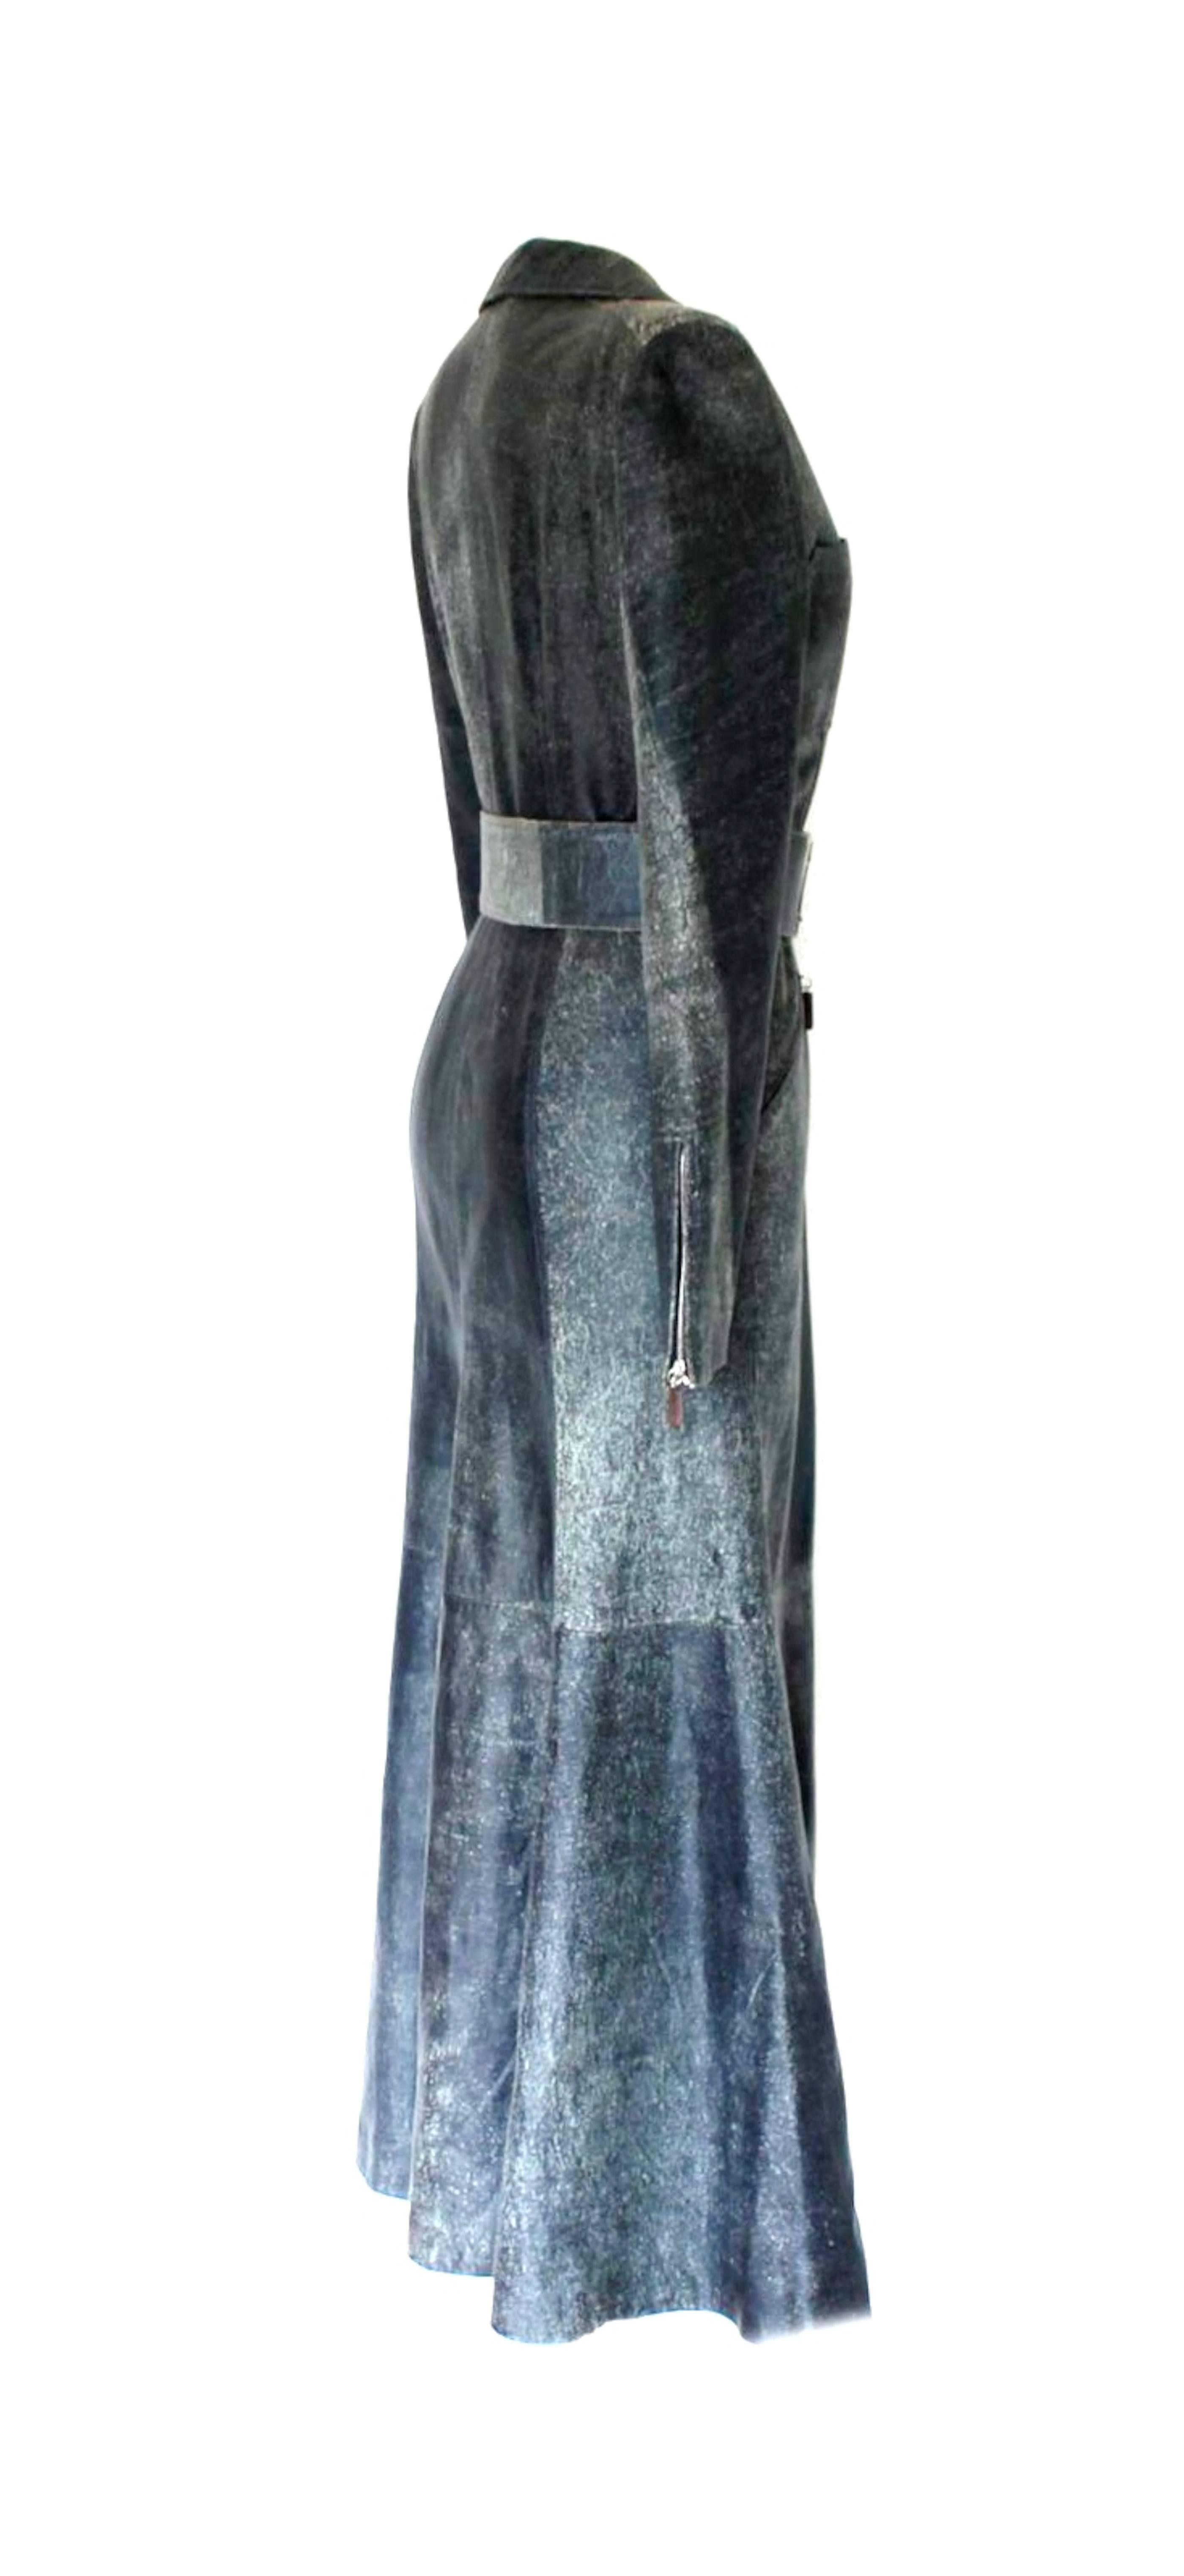 

FANTASTIC GIANNI VERSACE COUTURE

 DENIM/JEANS-STYLE DISTRESSED LEATHER GOWN

AS SHOWN ON THE RUNWAY SHOW AND AD CAMPAIGN

SOLD OUT IMMEDIATELY

    Impossible to find!
    A true gem! This is a very rare and out-of-the-ordinary gown
 